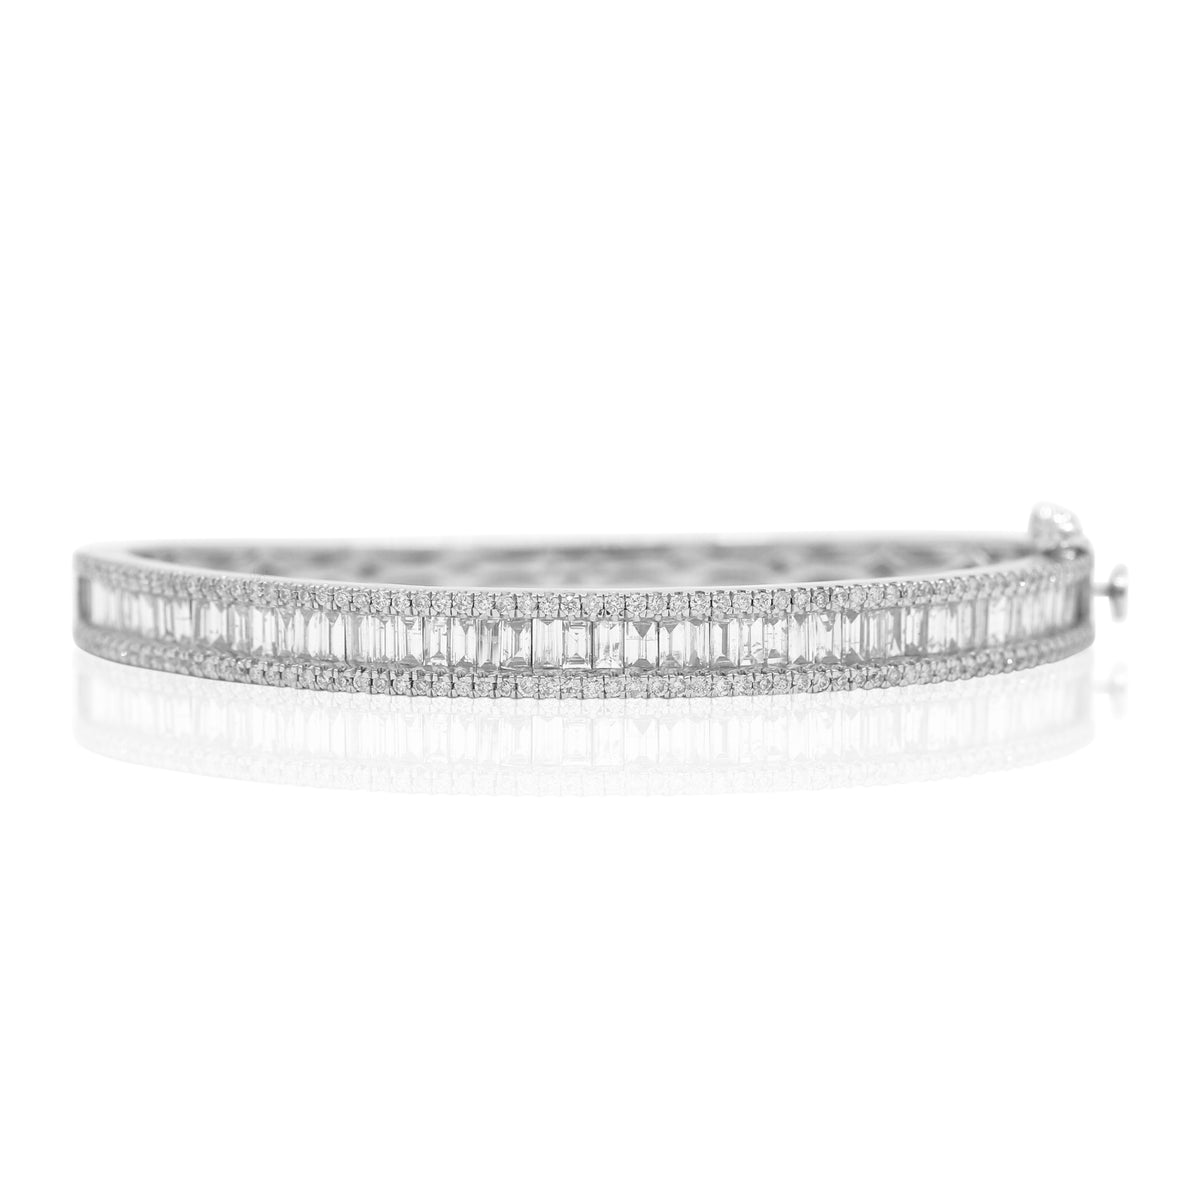 Baguette Bangle - Thick